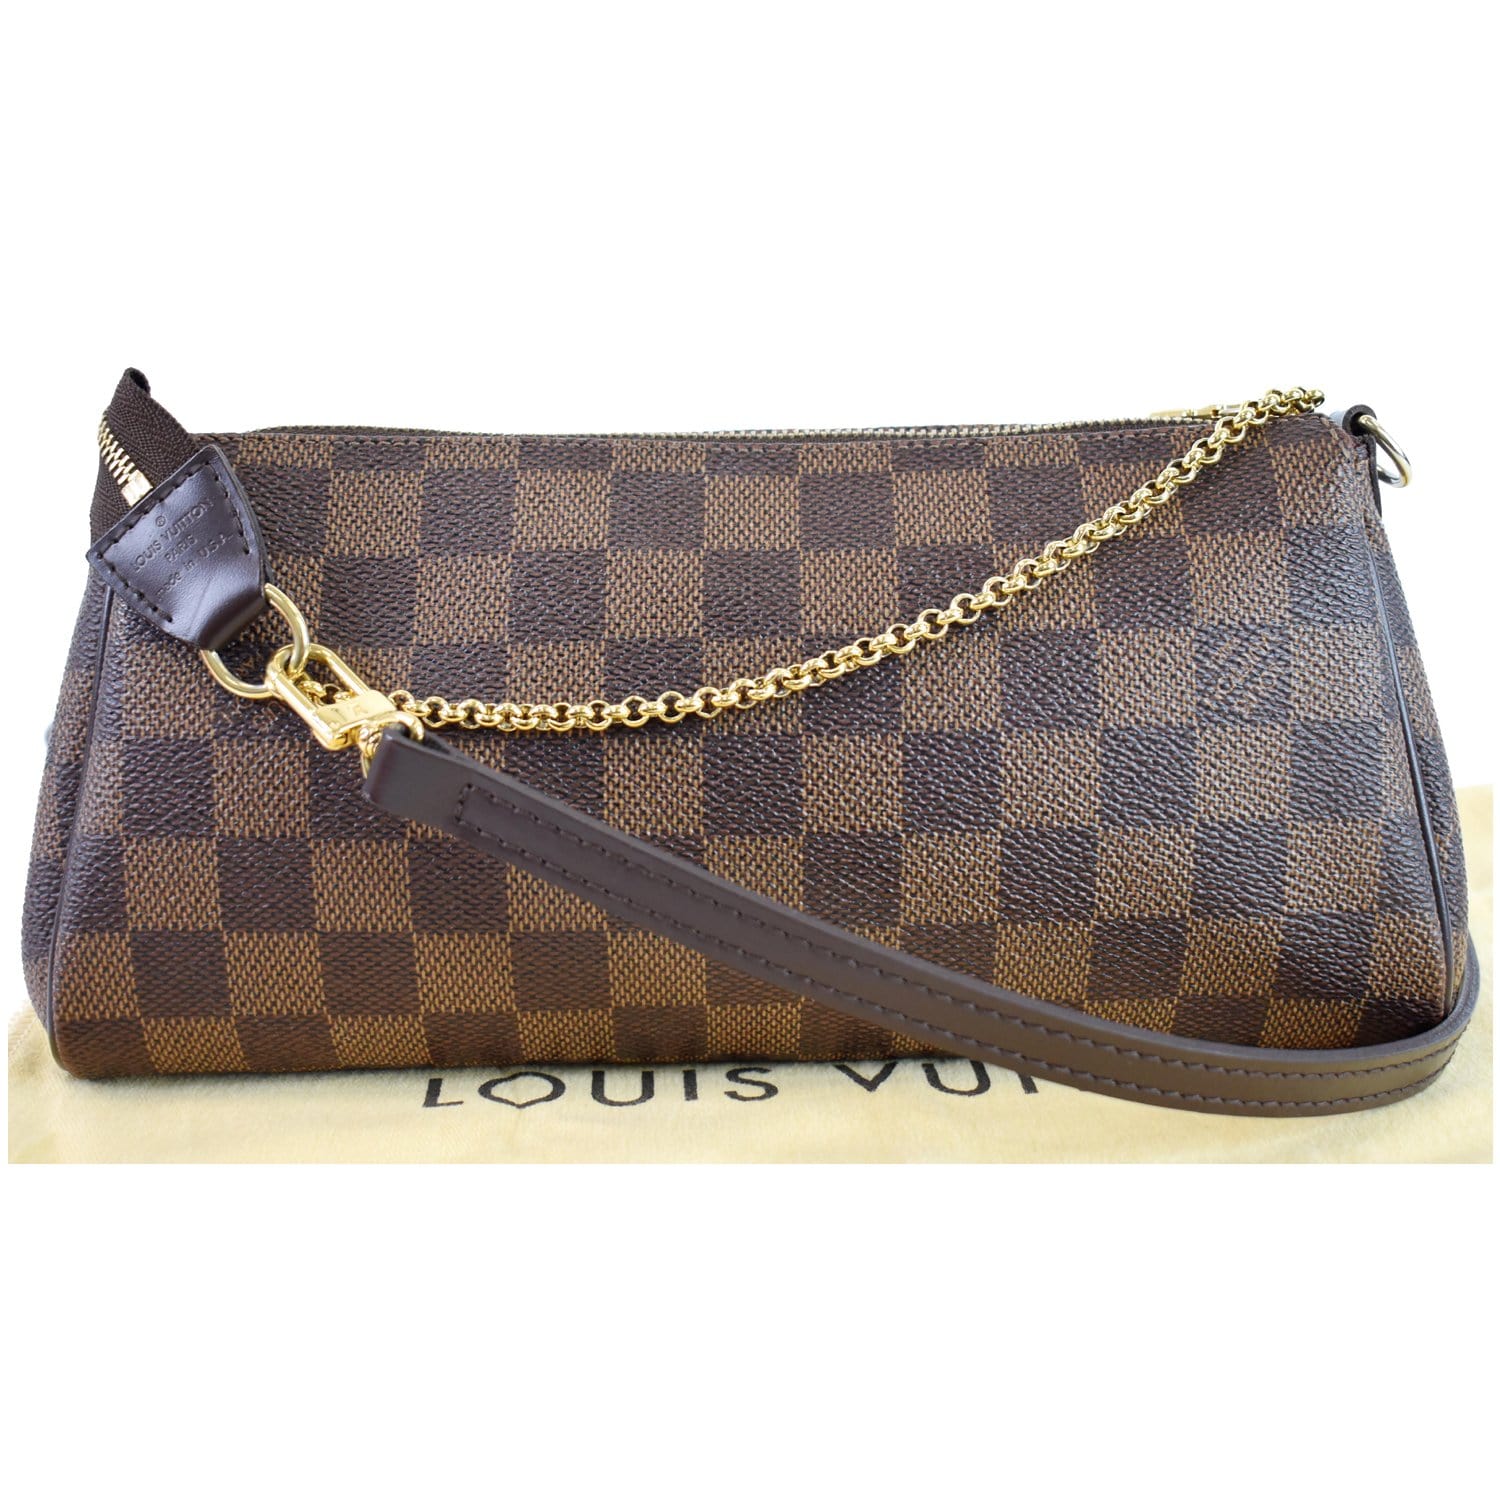 Gently Used Authentic Louis Vuitton Brown Damier Ebene Eva Clutch